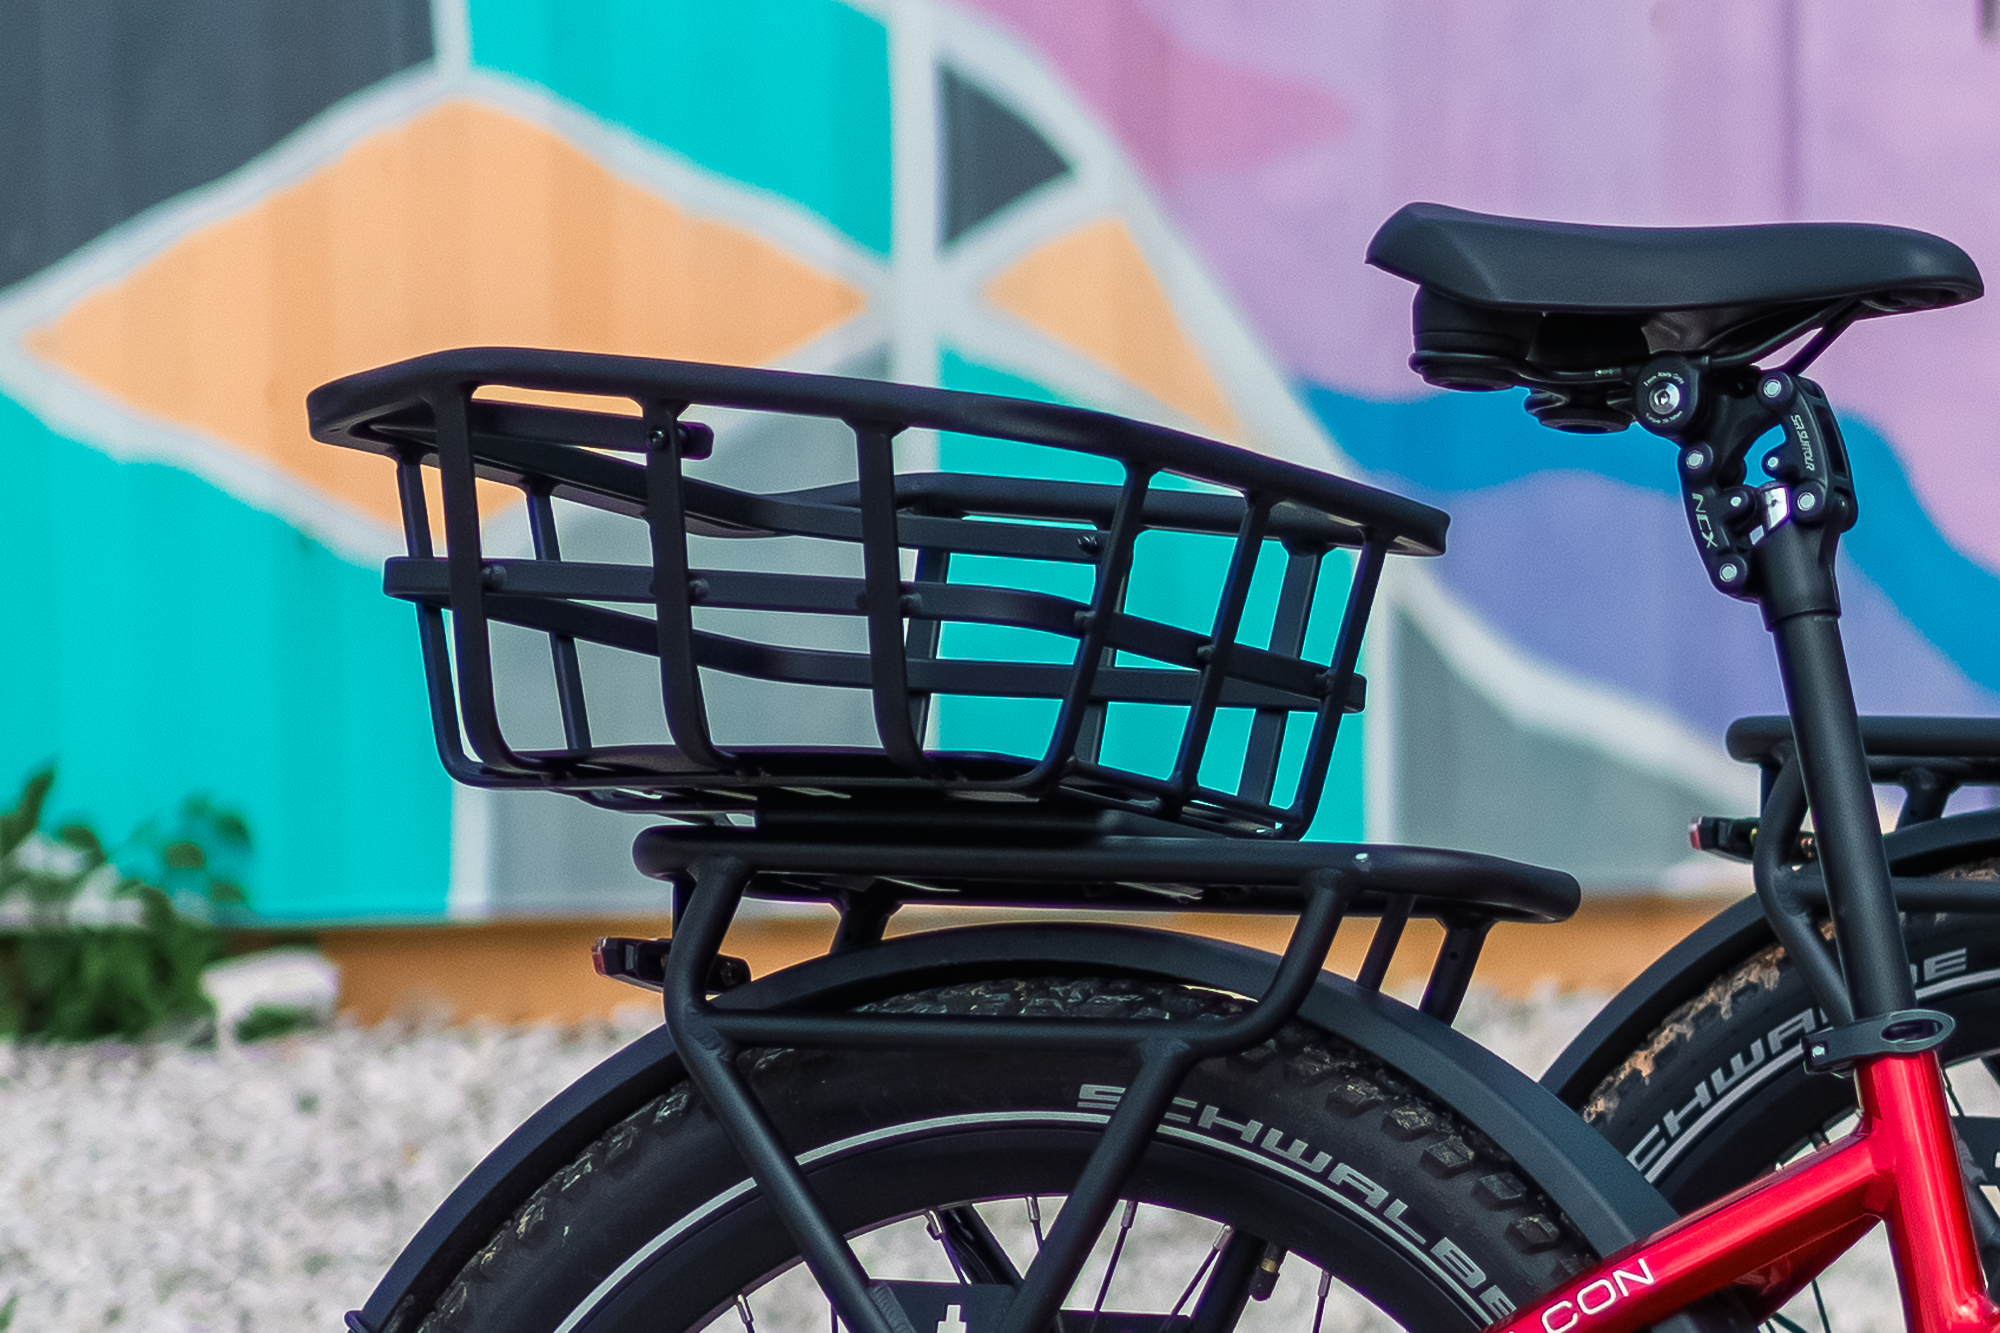 Our custom-made rear basket is a convenient easy on/easy off basket that is there when you need it.  Great for quick trips to the farmers market or for a long day of exploring town. This clever design even boasts a handy carrying handle